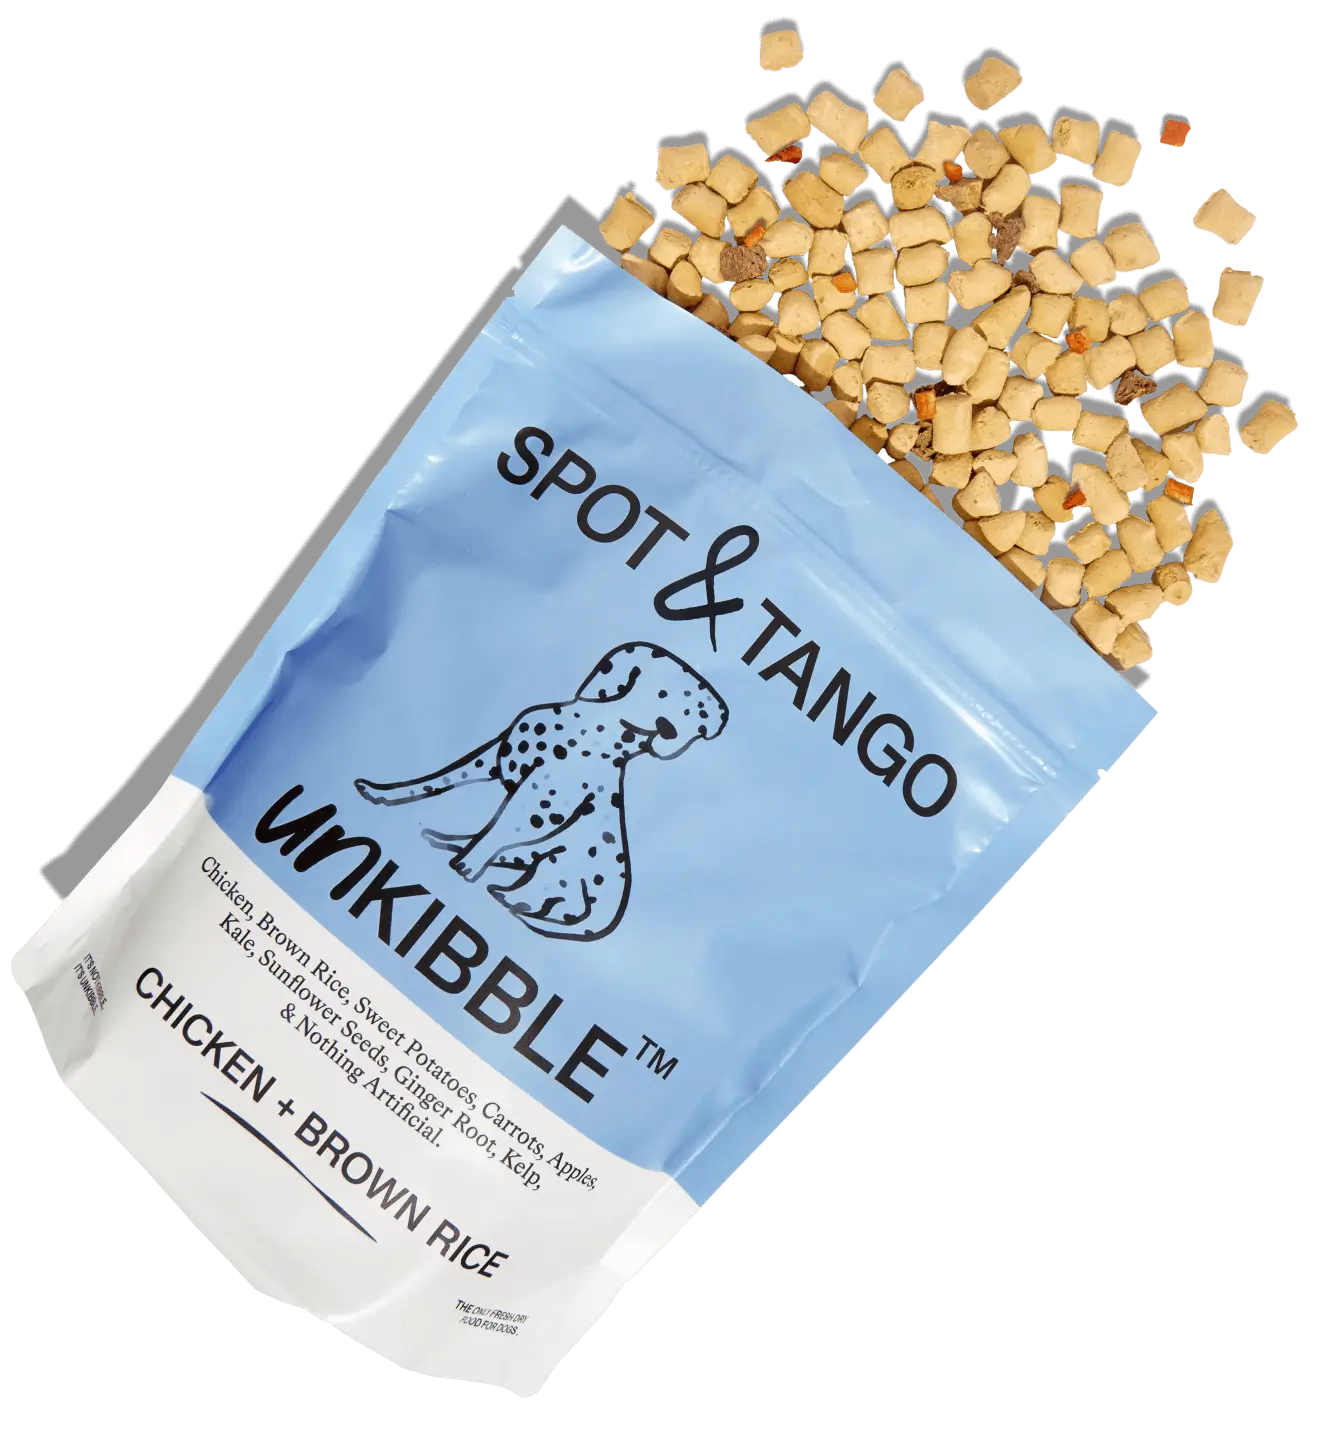 Spot and Tango UnKibble Dog Food Review (Dry)